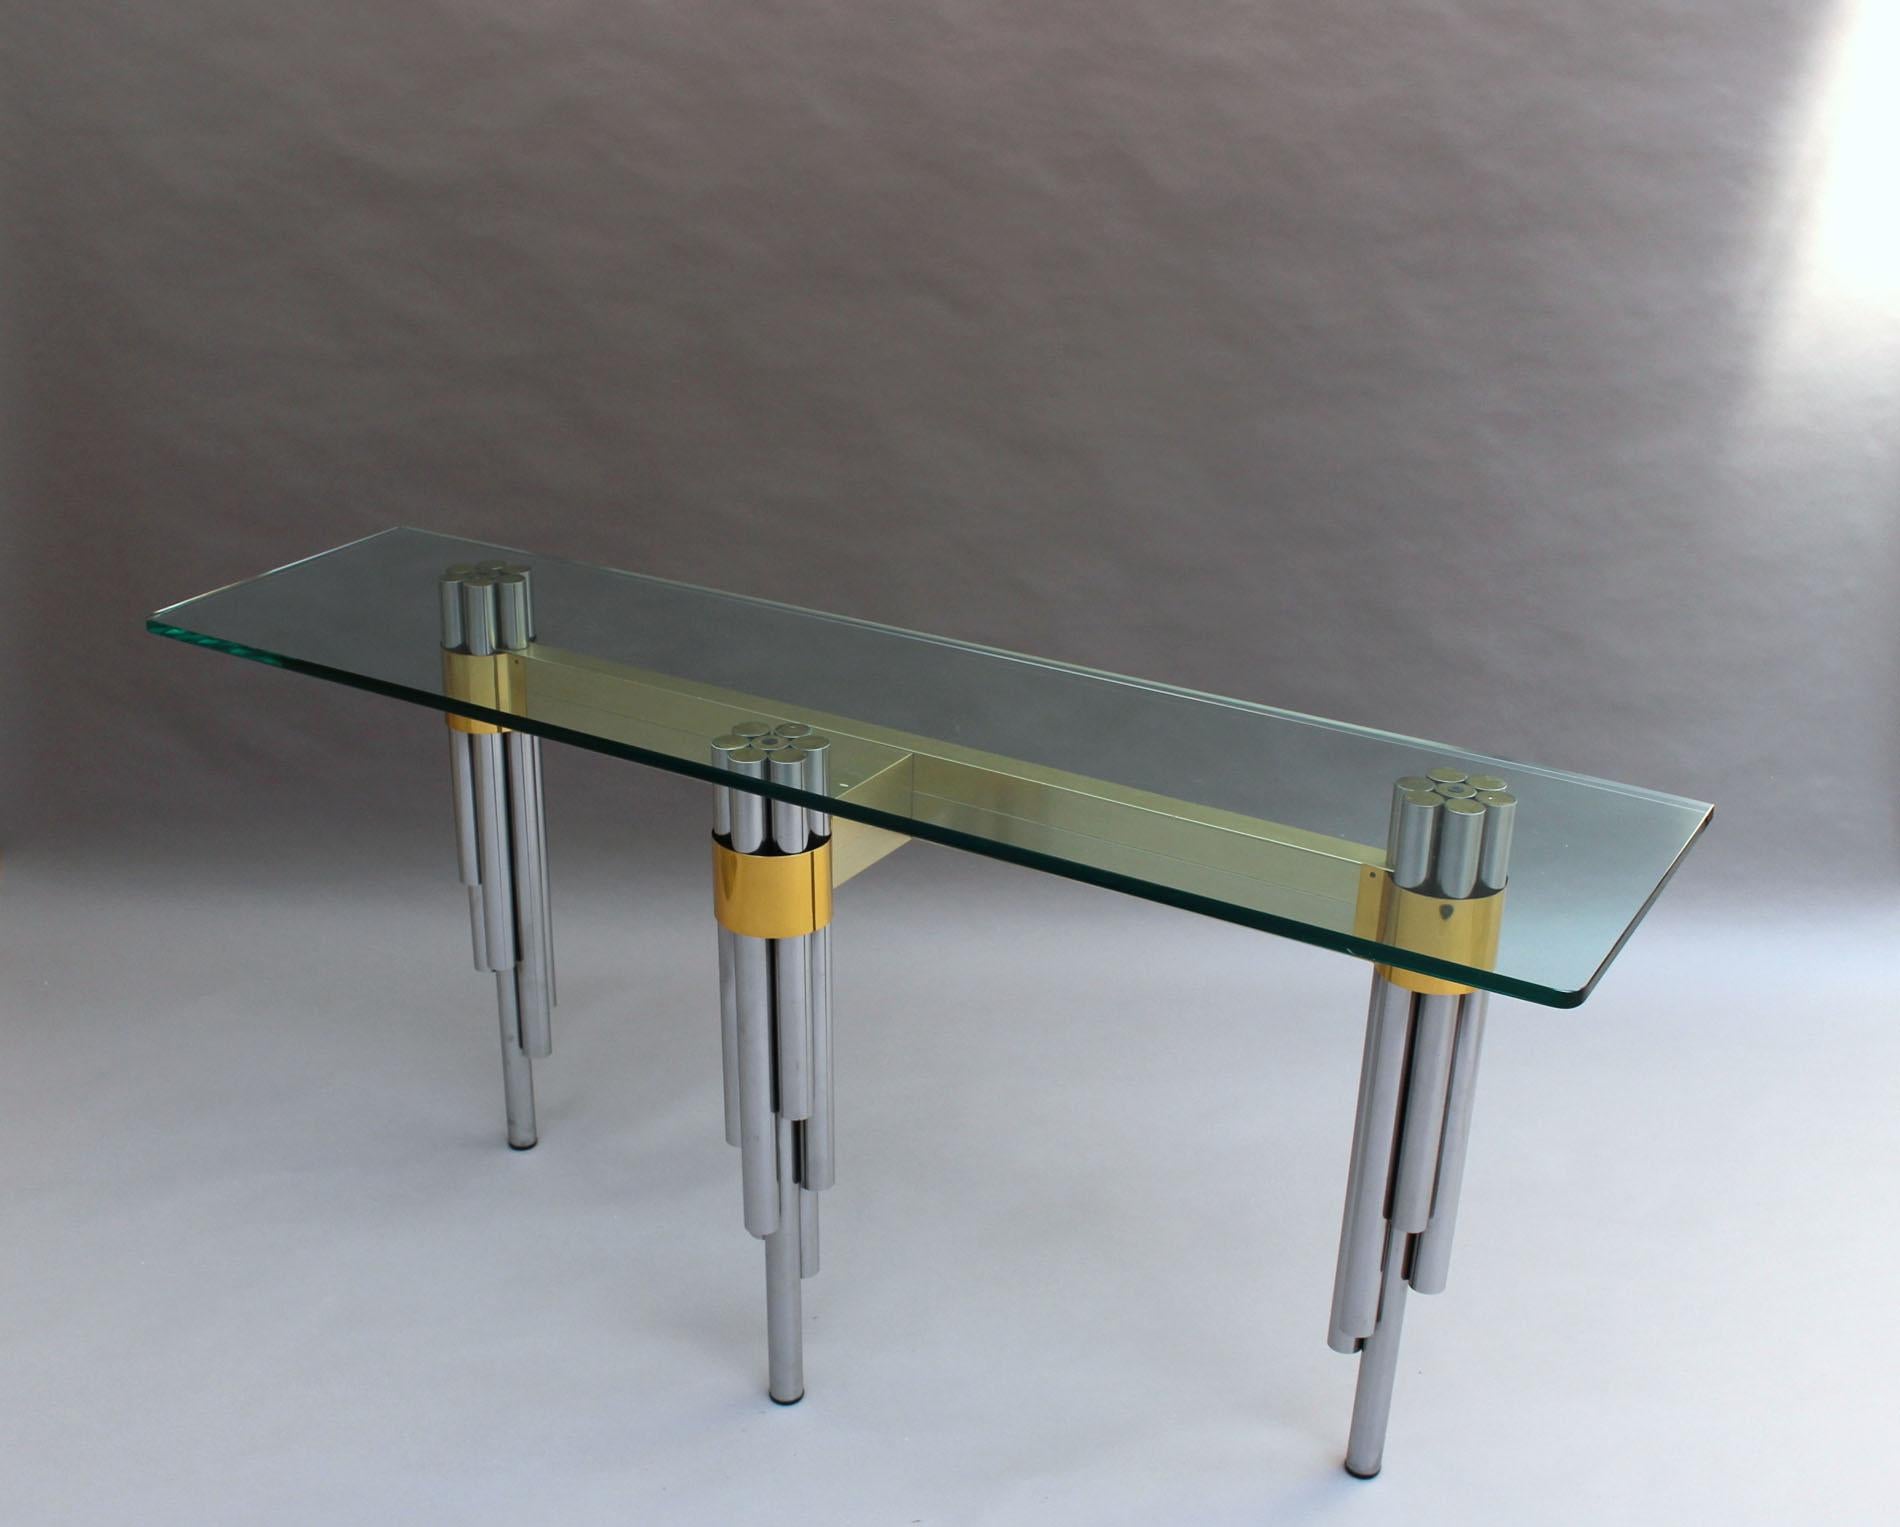 Fine French 1970s Sofa Table / Console by Philippe Jean For Sale 3